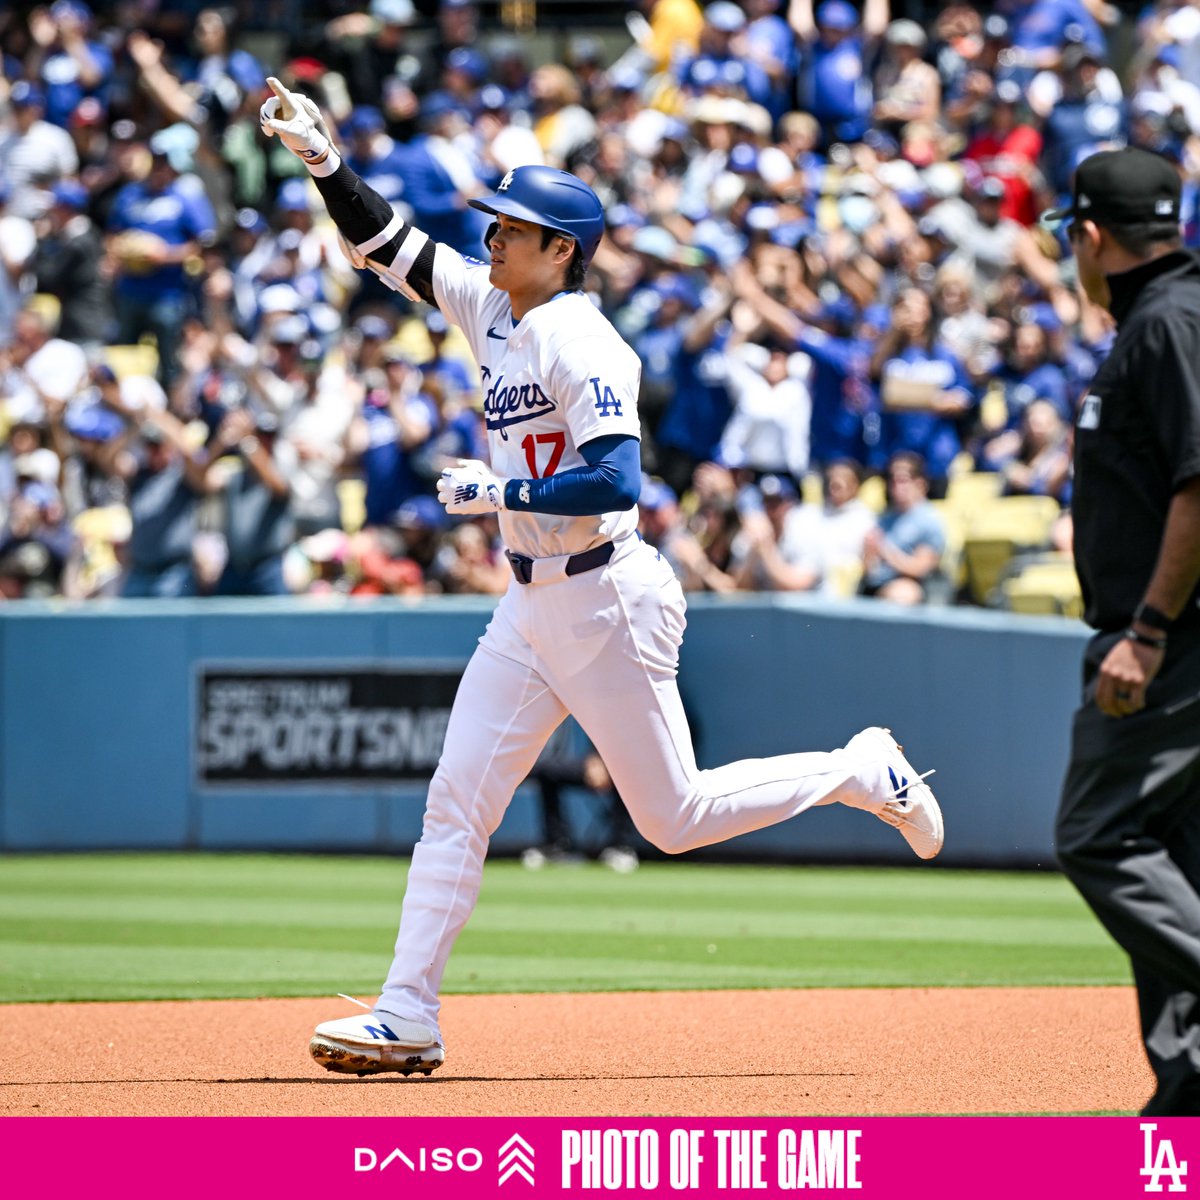 Tonight’s Photo of the Game presented by Daiso.